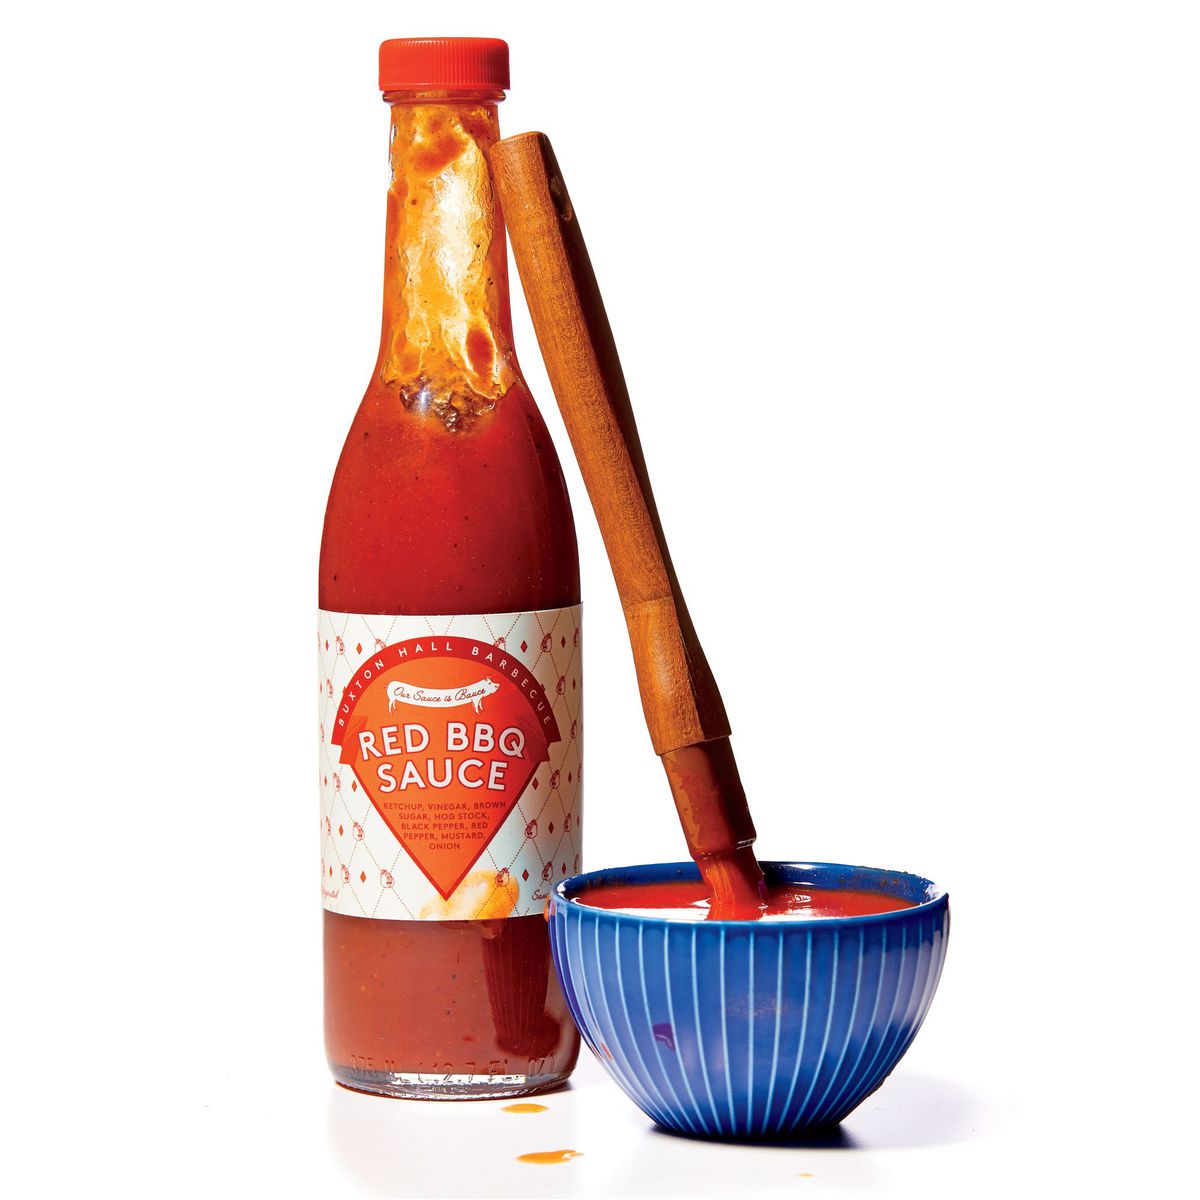 2018 Food Awards: Buxton Hall Barbecue Red BBQ Sauce